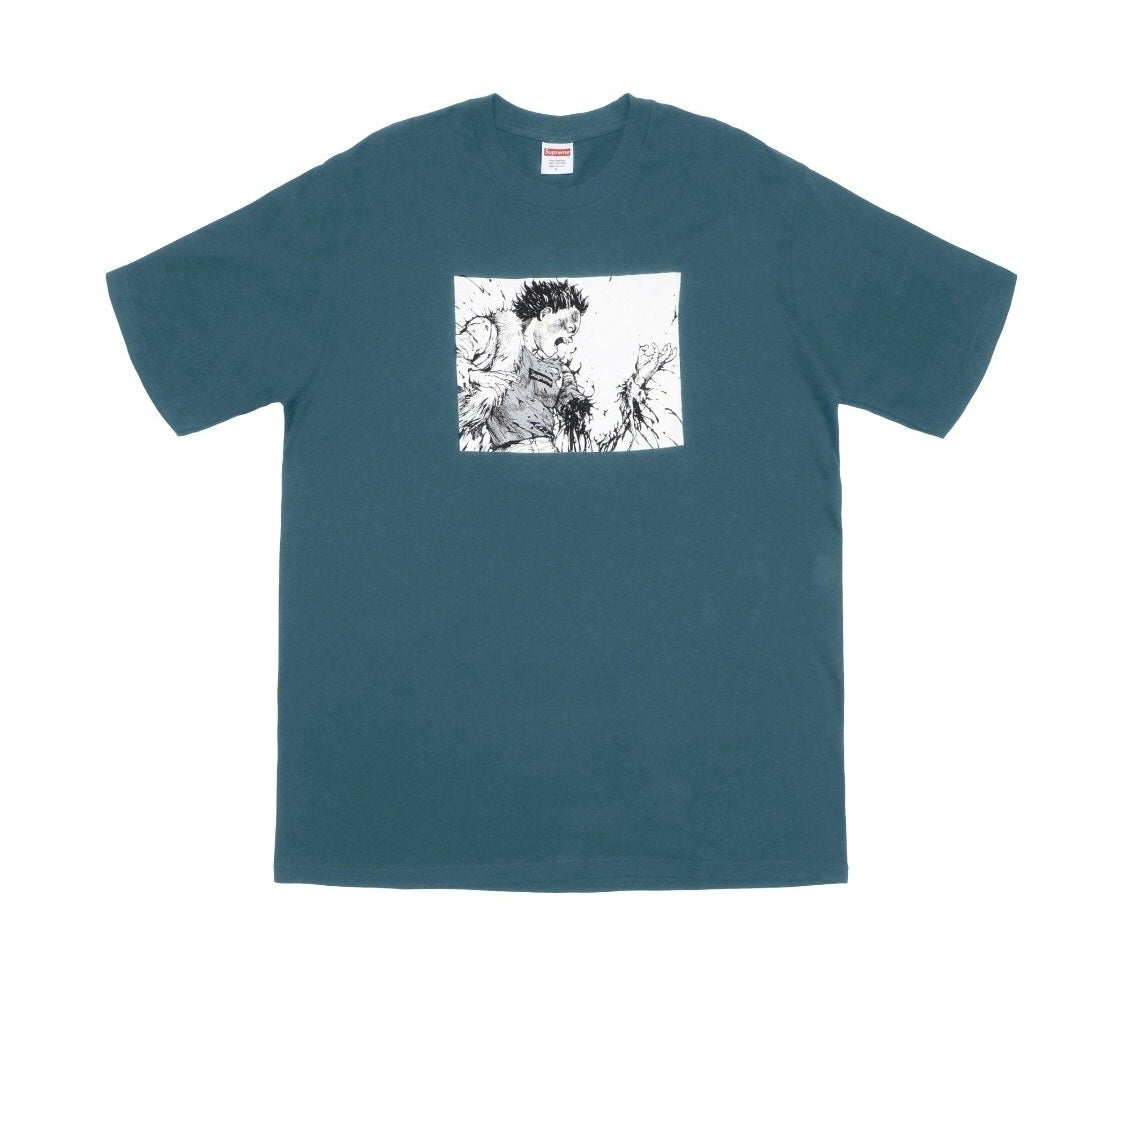 Supreme tee “Akira arm” - Centrall Online